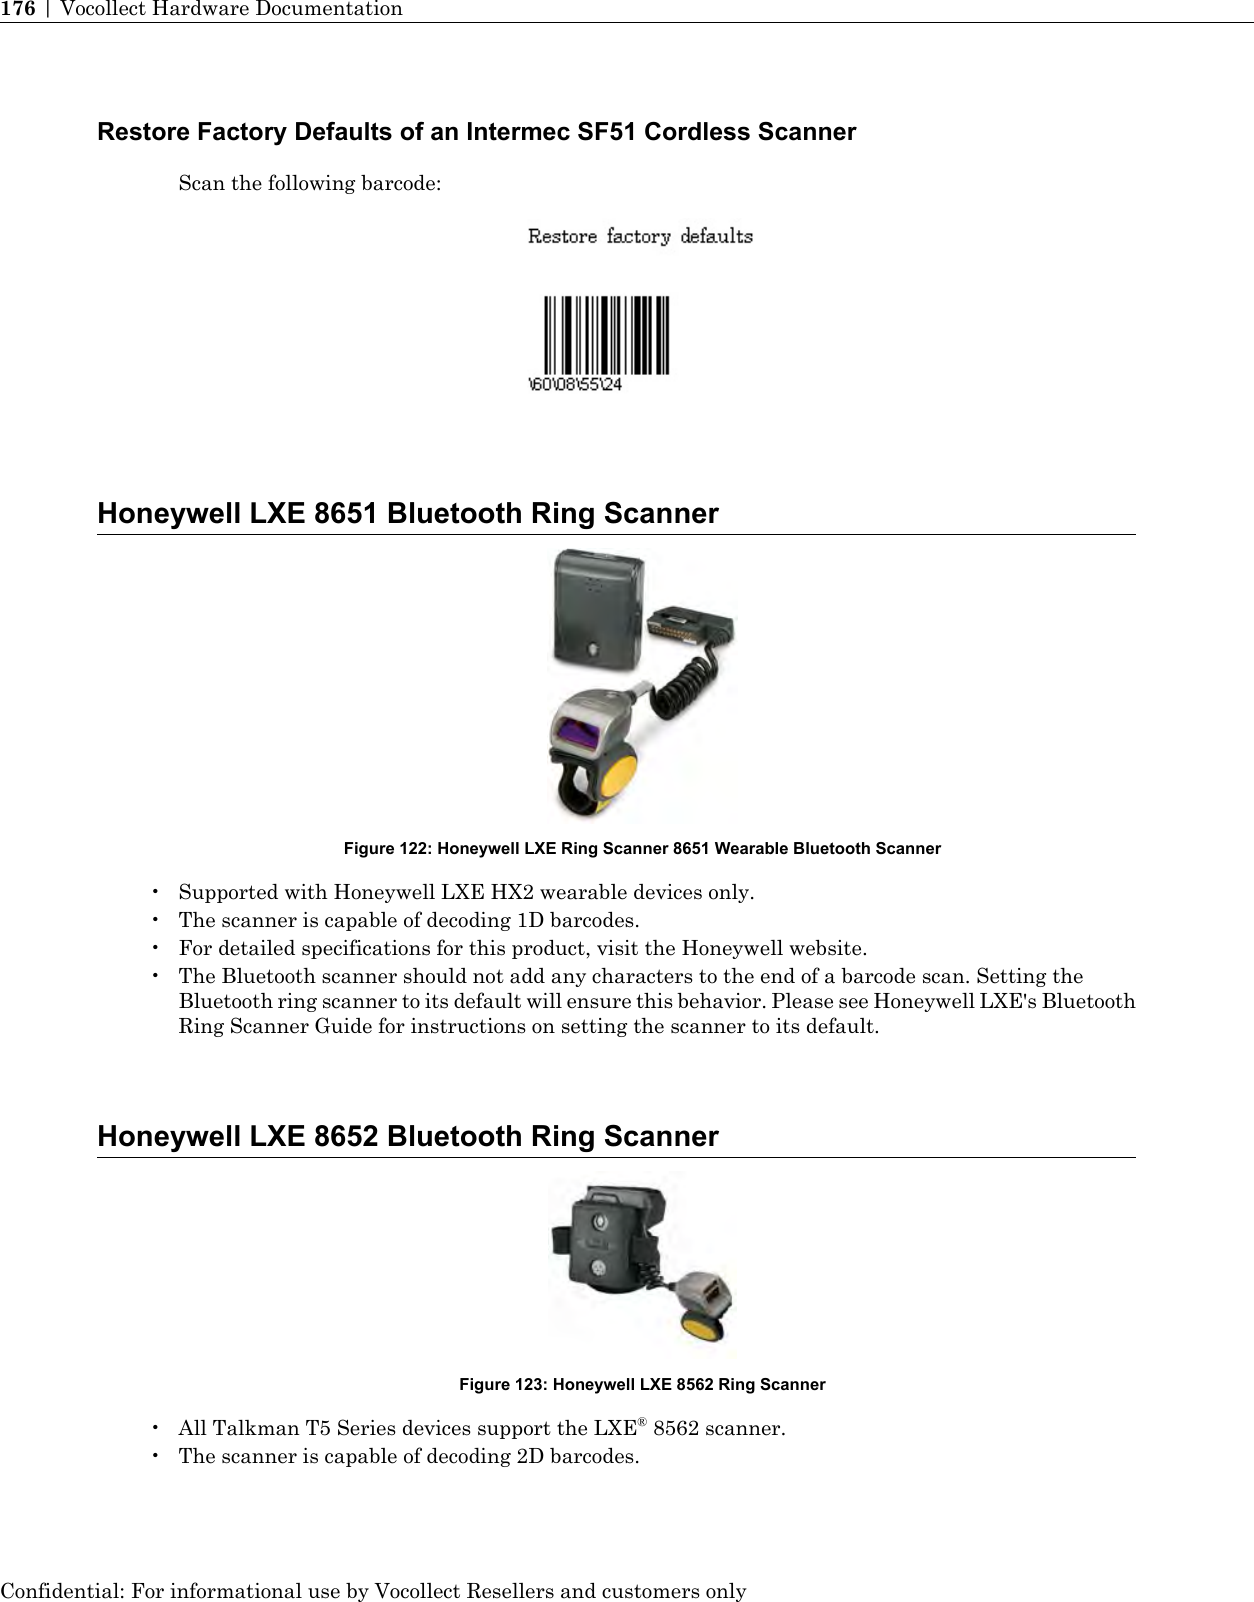 Restore Factory Defaults of an Intermec SF51 Cordless ScannerScan the following barcode:Honeywell LXE 8651 Bluetooth Ring ScannerFigure 122: Honeywell LXE Ring Scanner 8651 Wearable Bluetooth Scanner• Supported with Honeywell LXE HX2 wearable devices only.• The scanner is capable of decoding 1D barcodes.• For detailed specifications for this product, visit the Honeywell website.• The Bluetooth scanner should not add any characters to the end of a barcode scan. Setting theBluetooth ring scanner to its default will ensure this behavior. Please see Honeywell LXE&apos;s BluetoothRing Scanner Guide for instructions on setting the scanner to its default.Honeywell LXE 8652 Bluetooth Ring ScannerFigure 123: Honeywell LXE 8562 Ring Scanner• All Talkman T5 Series devices support the LXE®8562 scanner.• The scanner is capable of decoding 2D barcodes.Confidential: For informational use by Vocollect Resellers and customers only176 | Vocollect Hardware Documentation